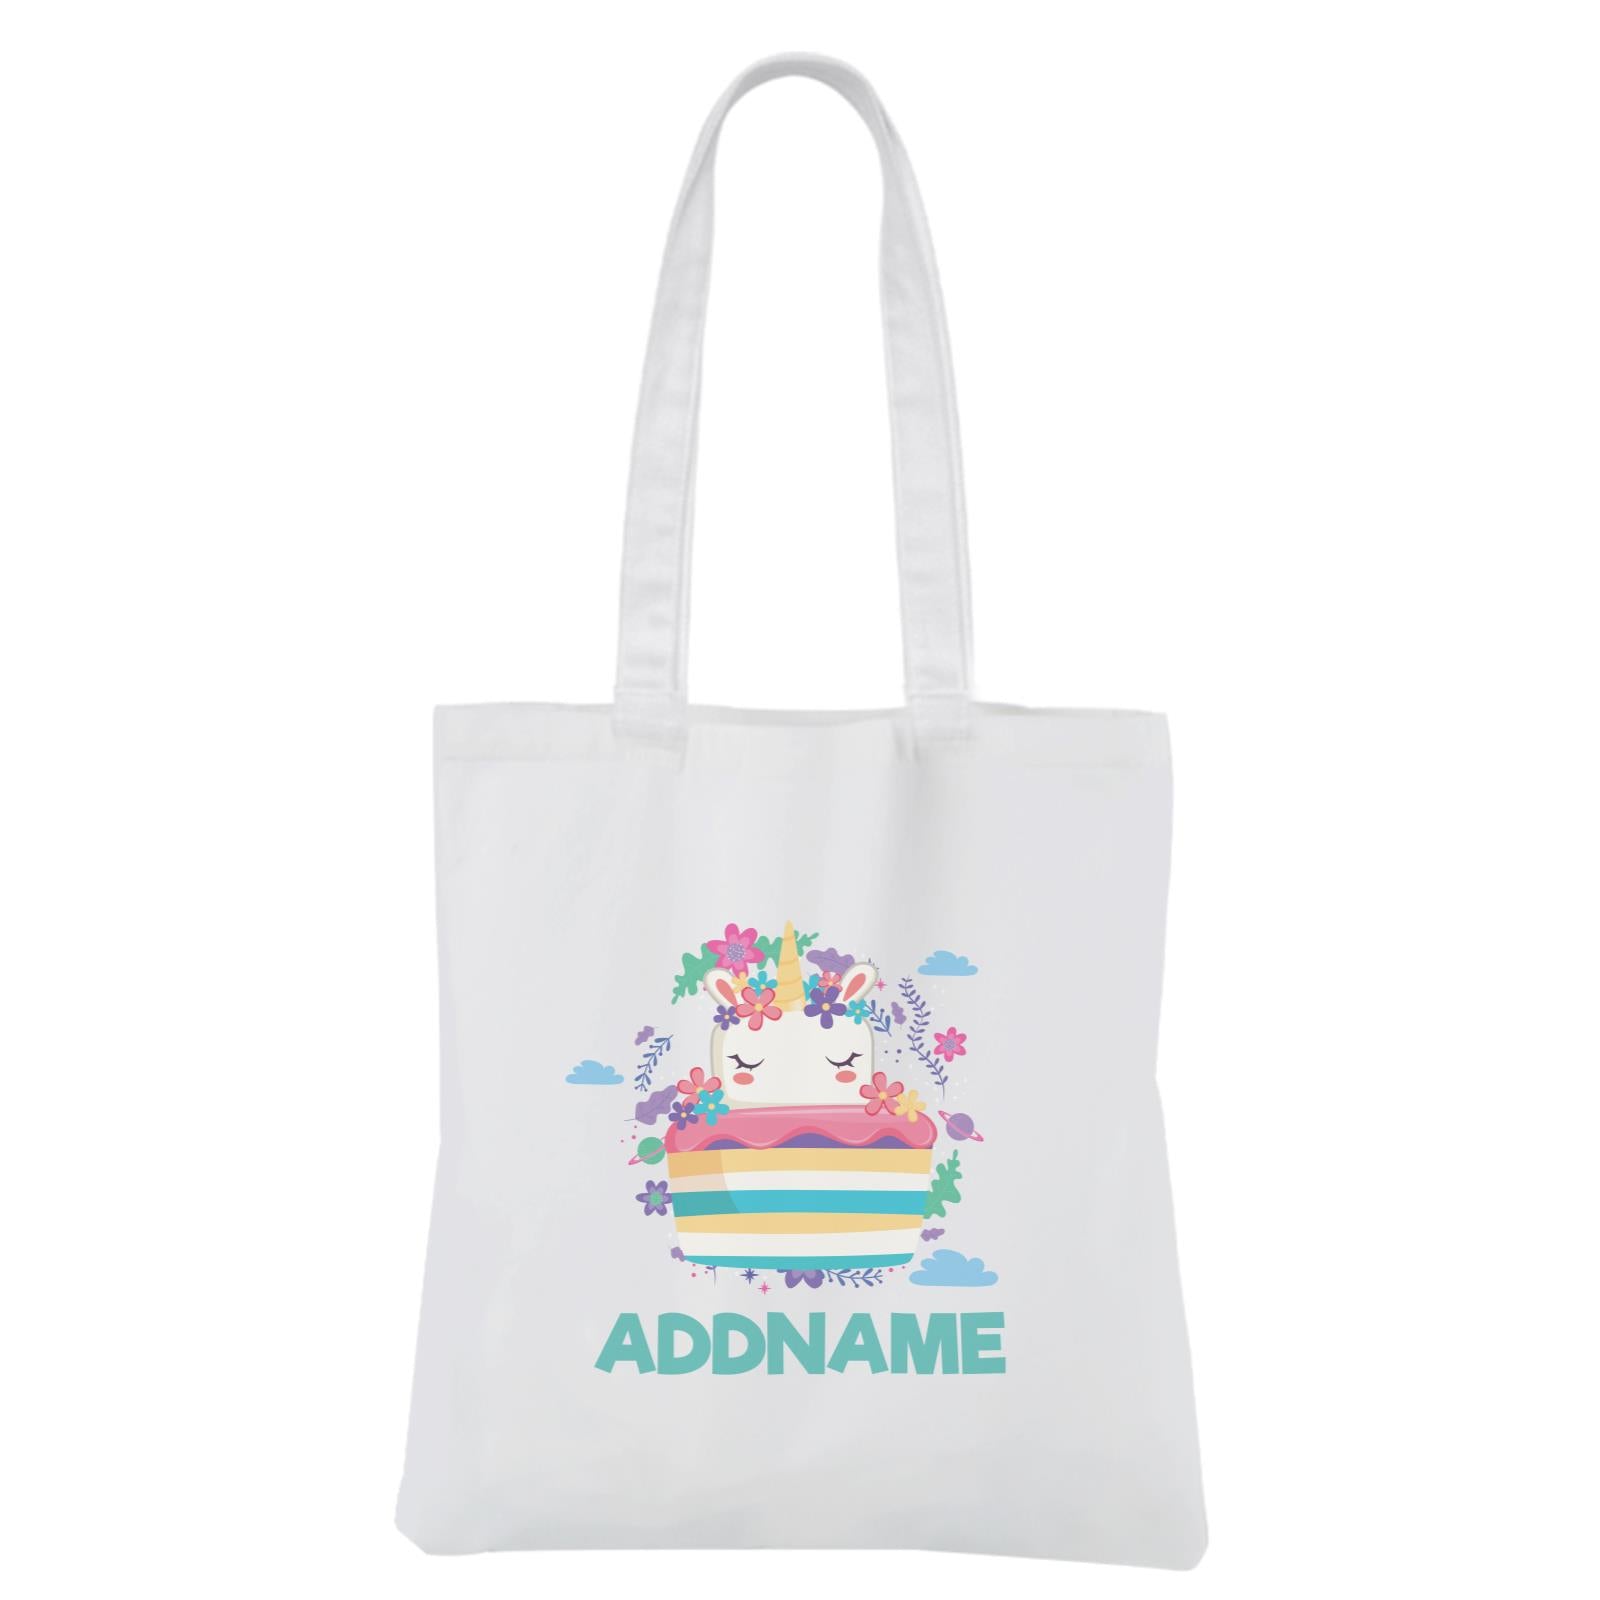 Unicorn with Donut Accessories White Canvas Bag